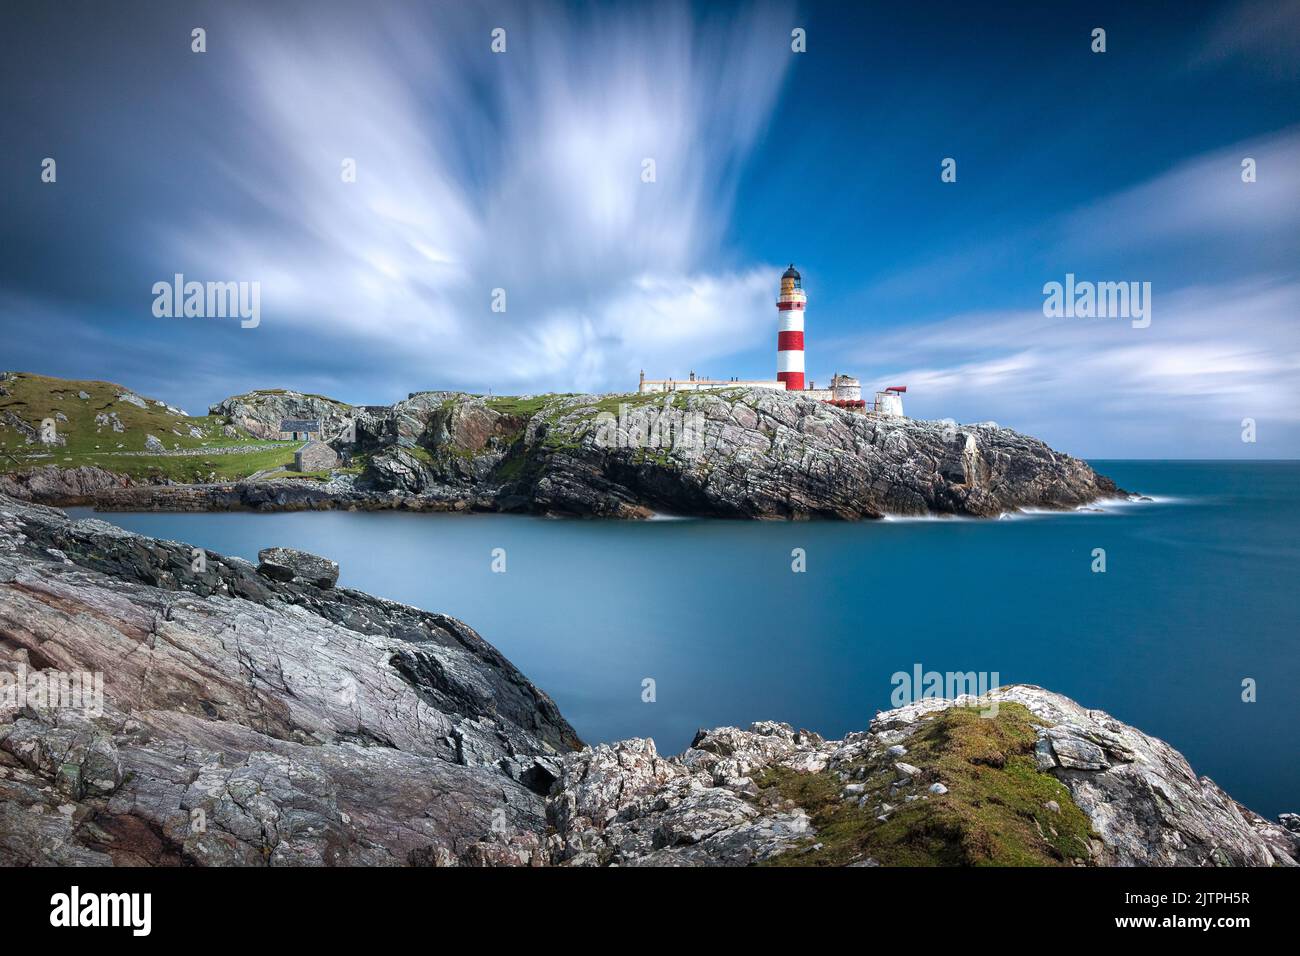 Eilean Glas Lighthouse, Scalpay, Hebrides, Scotland. Completed in 1789 and replaced in 1824, Eilean Glas is the first lighthouse in the Hebrides. It i Stock Photo